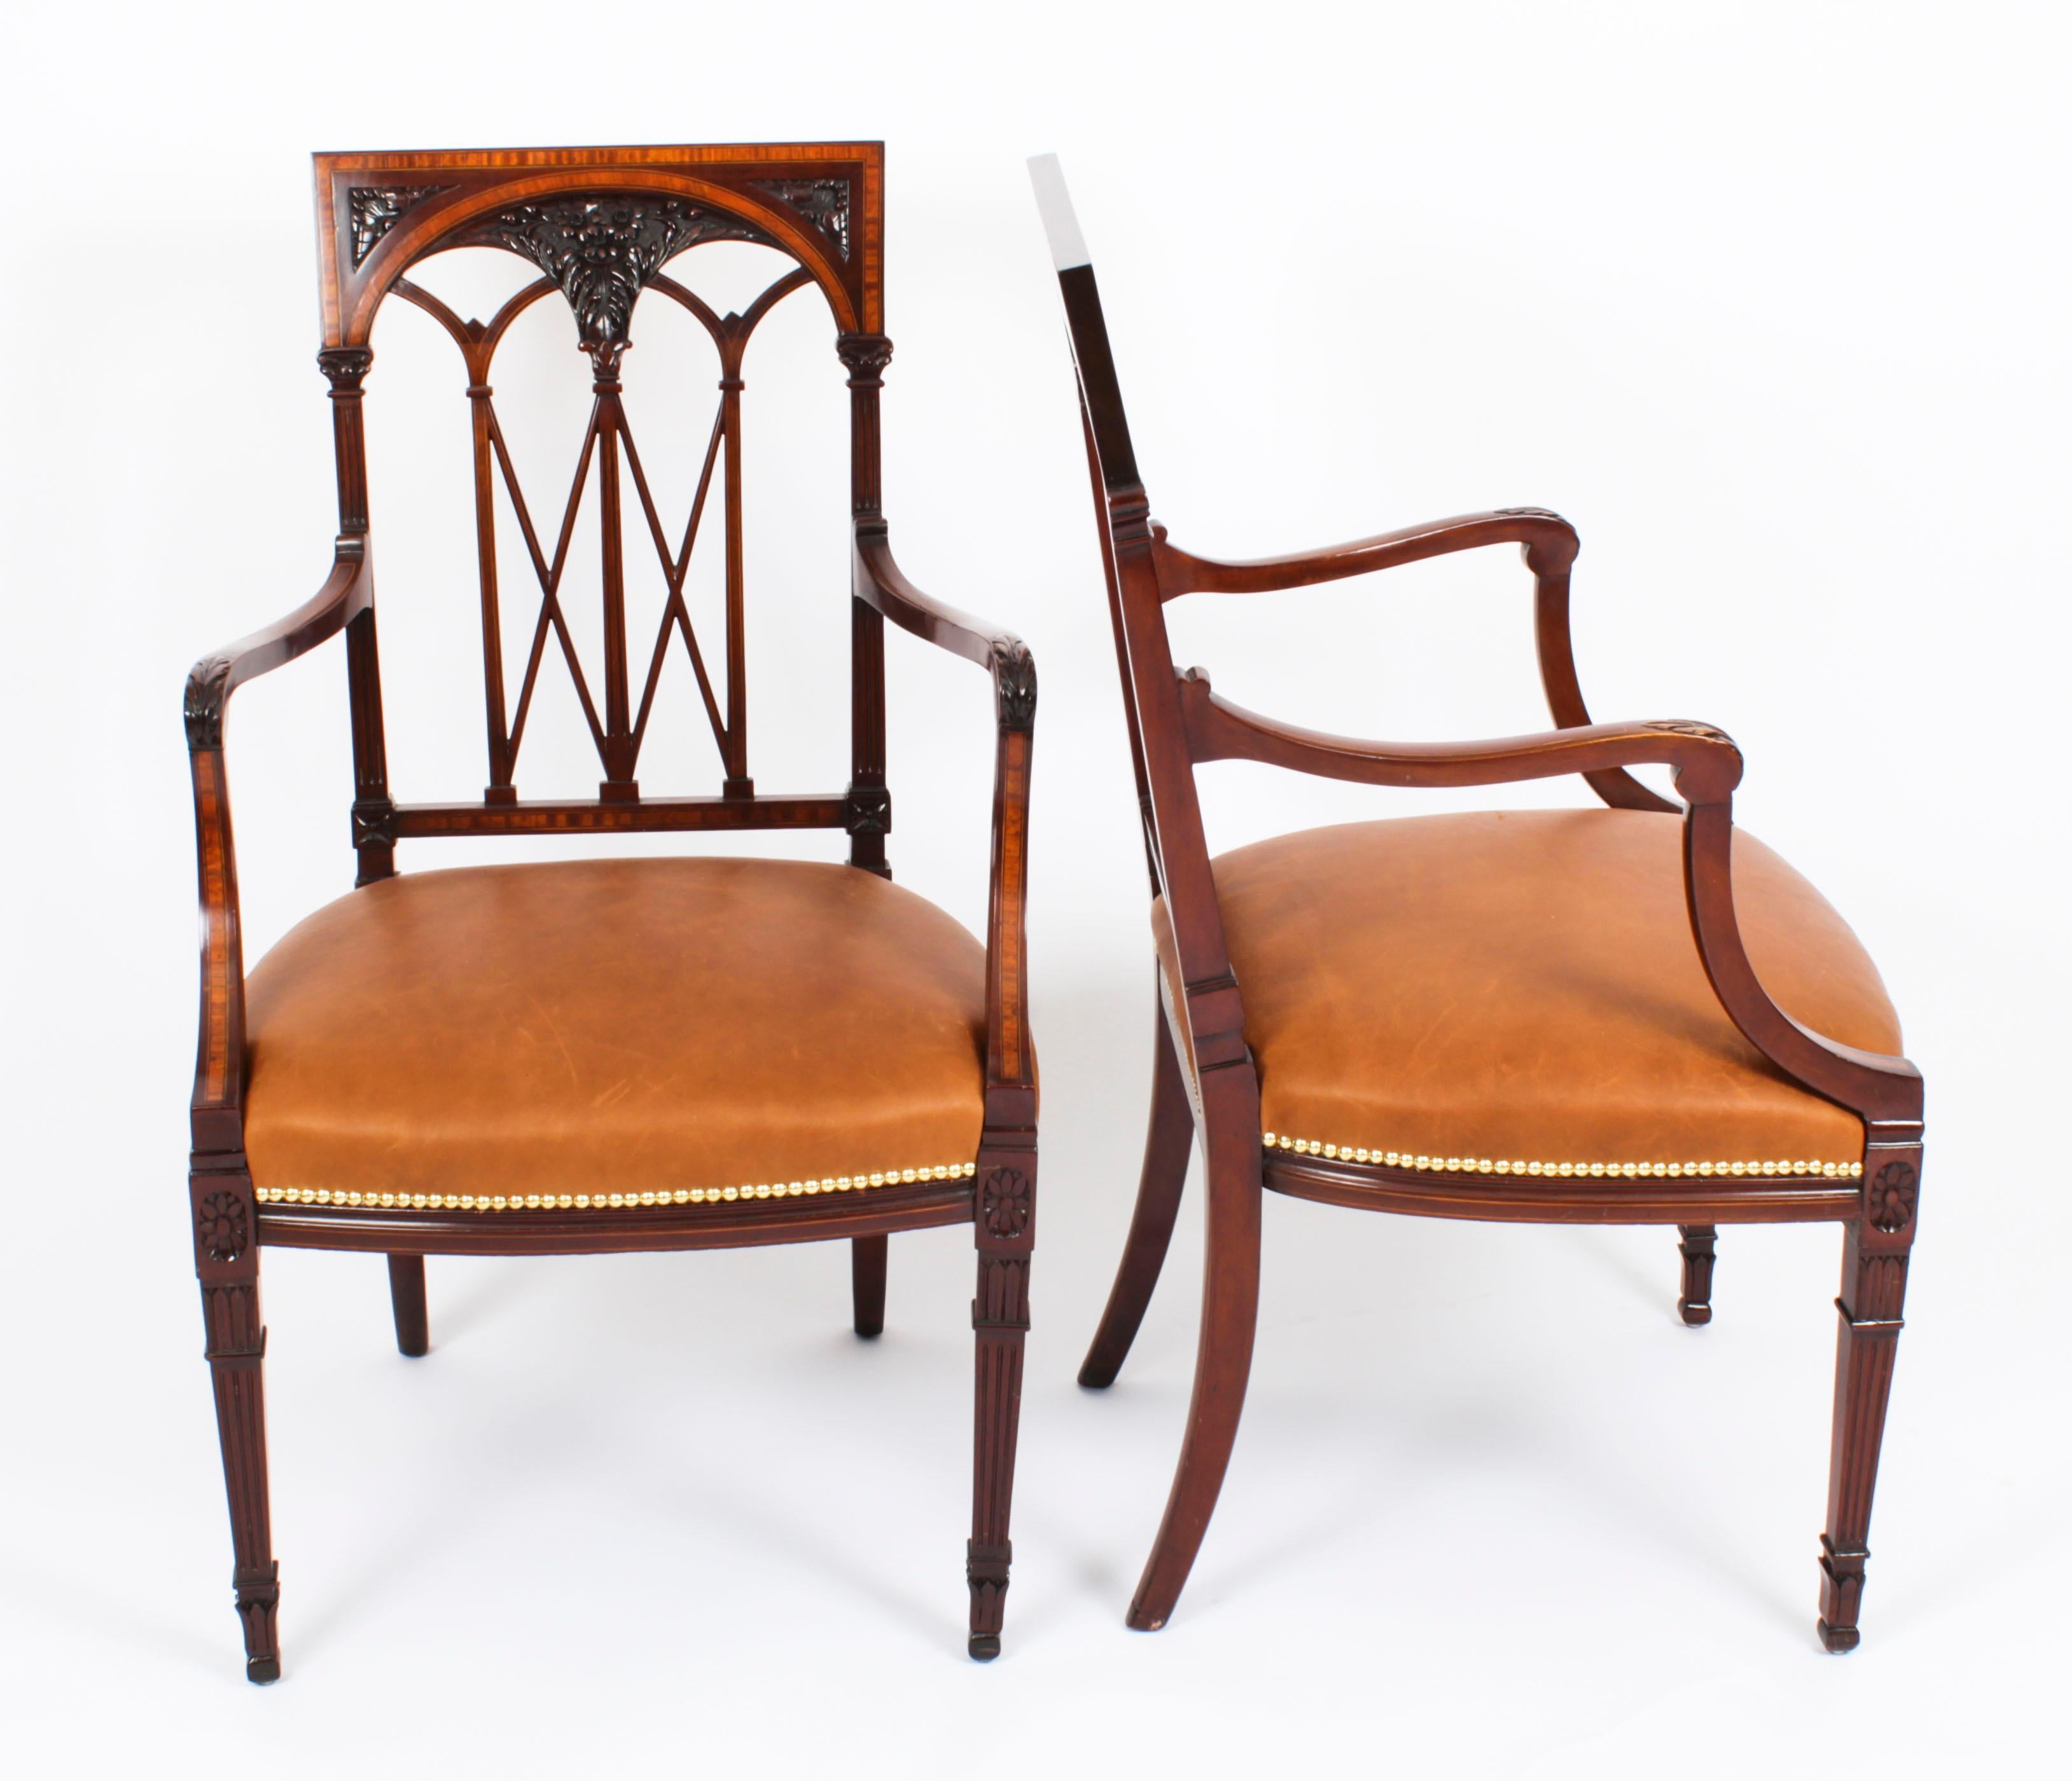 A superb and striking pair of satinwood banded armchairs, in Sheraton Revival taste, Circa 1880 in date.
 
The high back arm chairs feature satinwood banding with boxwood and ebonised line inlay and wonderful foliate carved decoration. The square